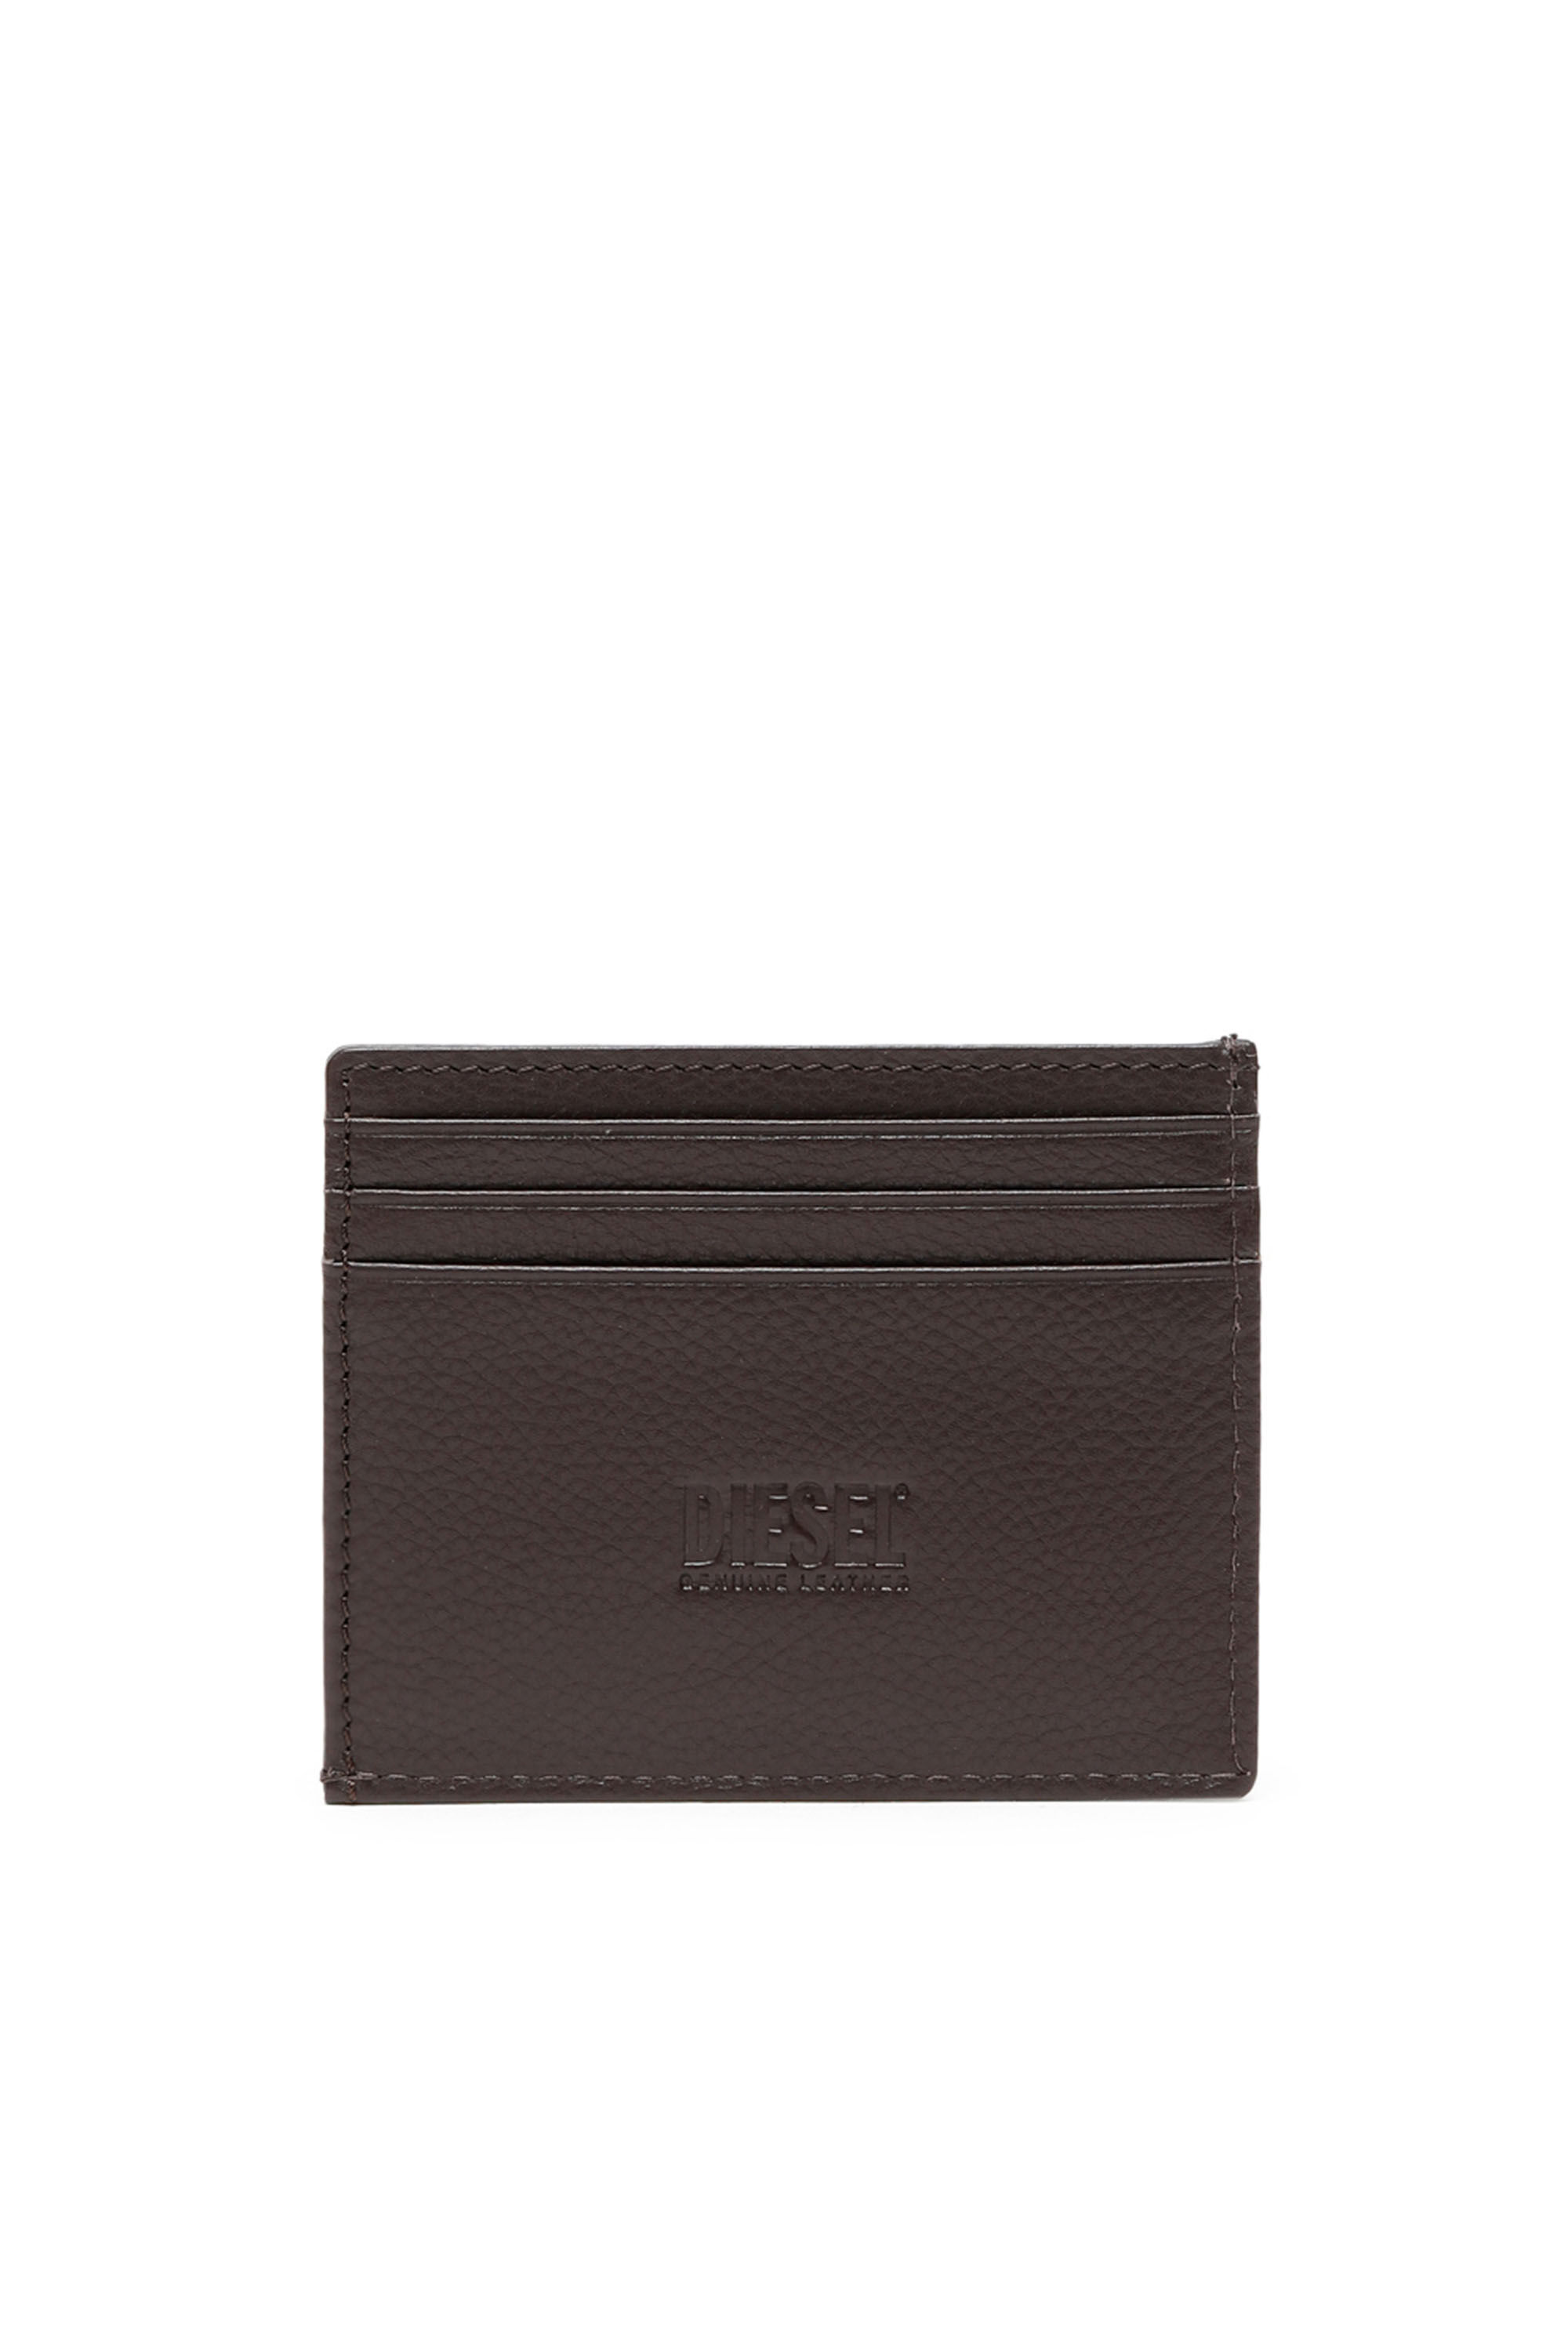 Diesel - CARD CASE, Man Card case in grained leather in Brown - Image 2